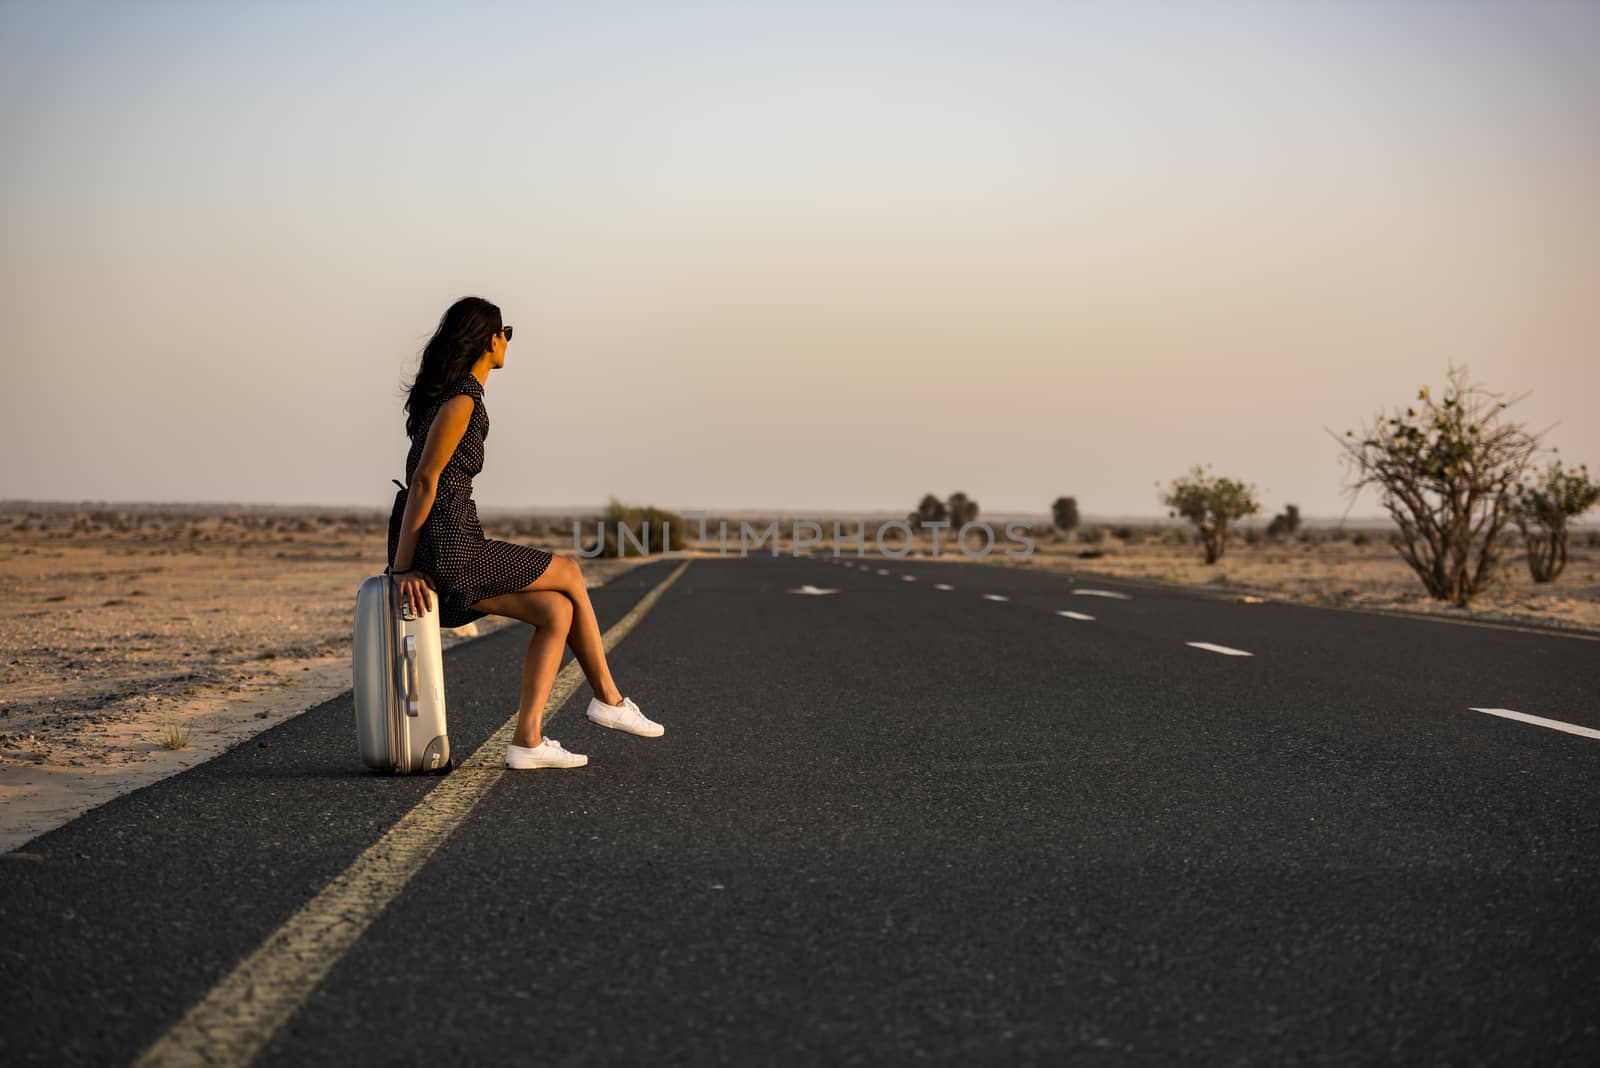 Woman waiting with her luggage on rural road in the desert by GABIS